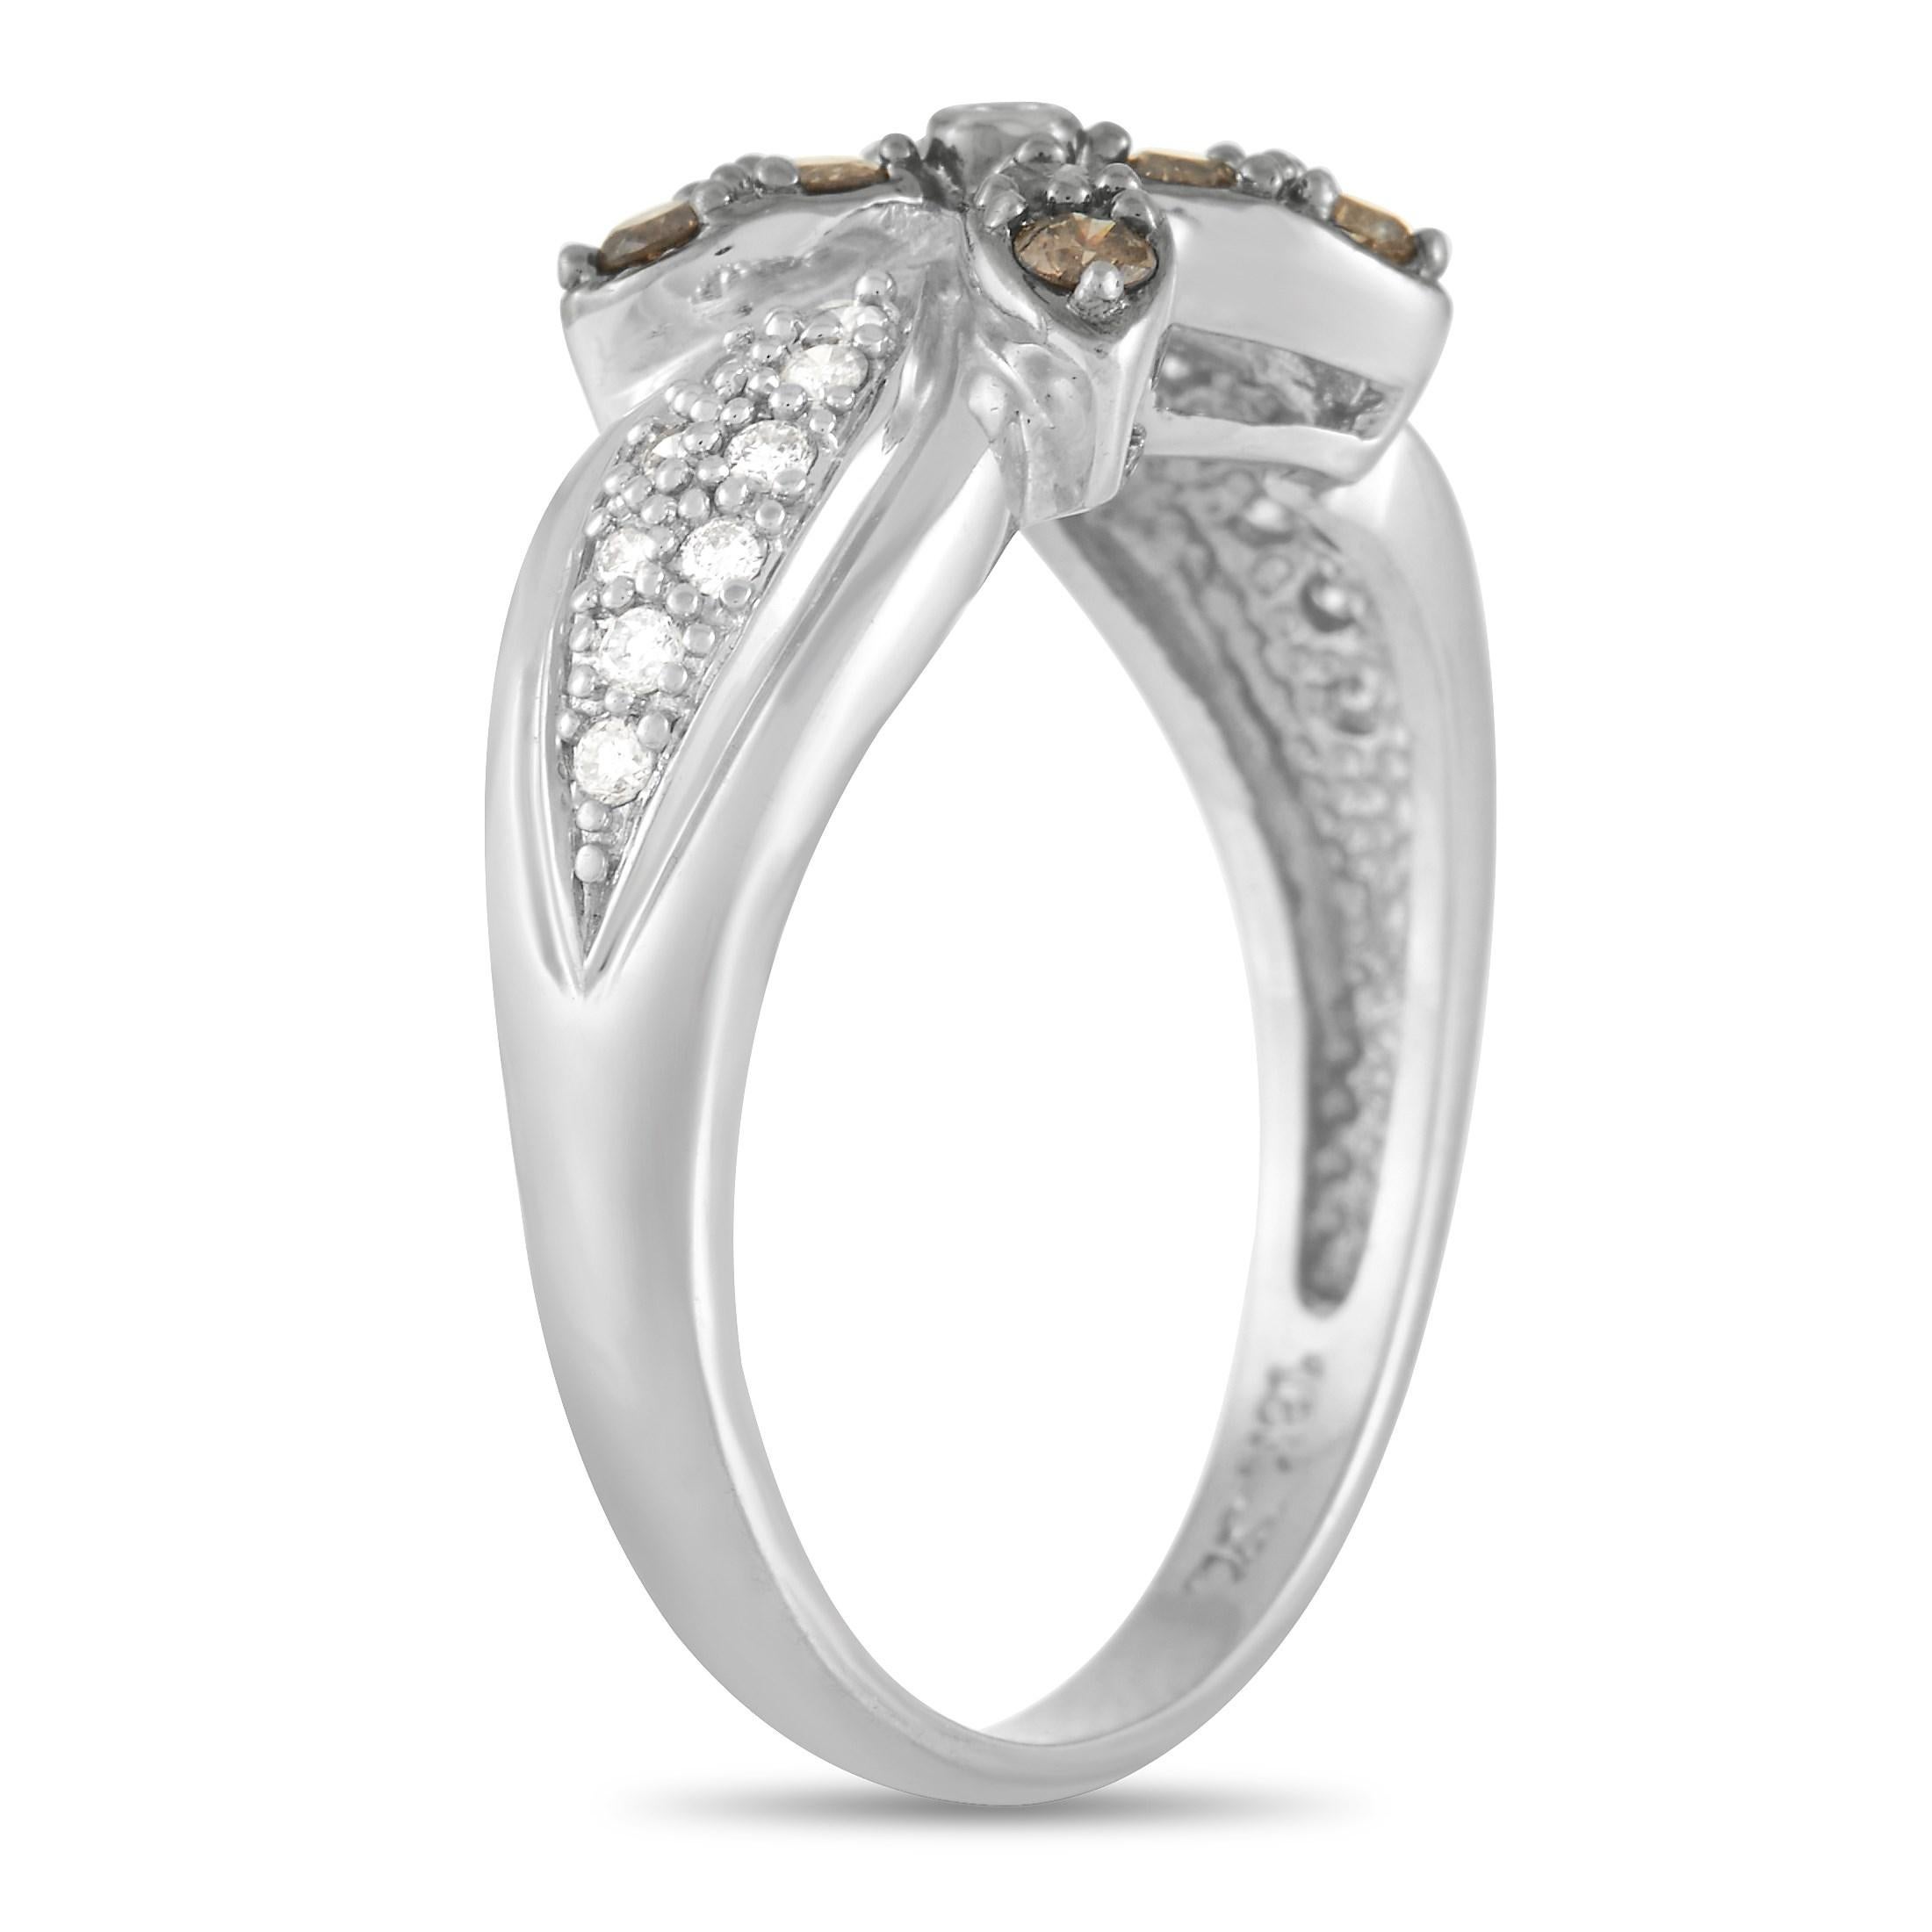 A fabulous floral motif sets this 18K White Gold ring from Le Vain apart in the best way possible. This impeccable piece’s 3mm wide band is adorned with shimmering white diamonds, while brown diamonds add a pop of color to the “petals.” A top height